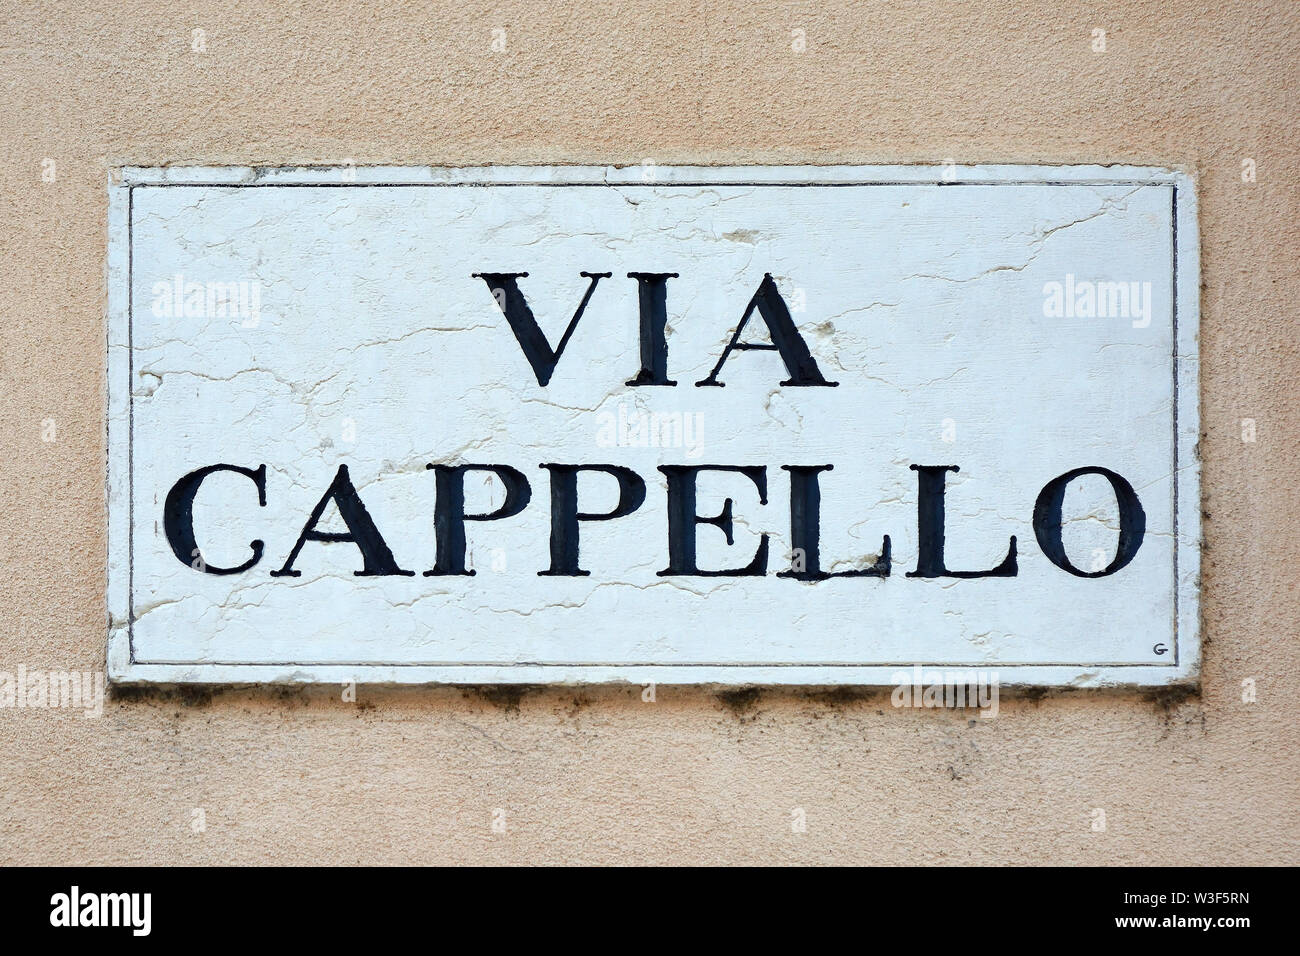 Street sign of the Via Cappello in the historic centre of Verona - Italy. Stock Photo